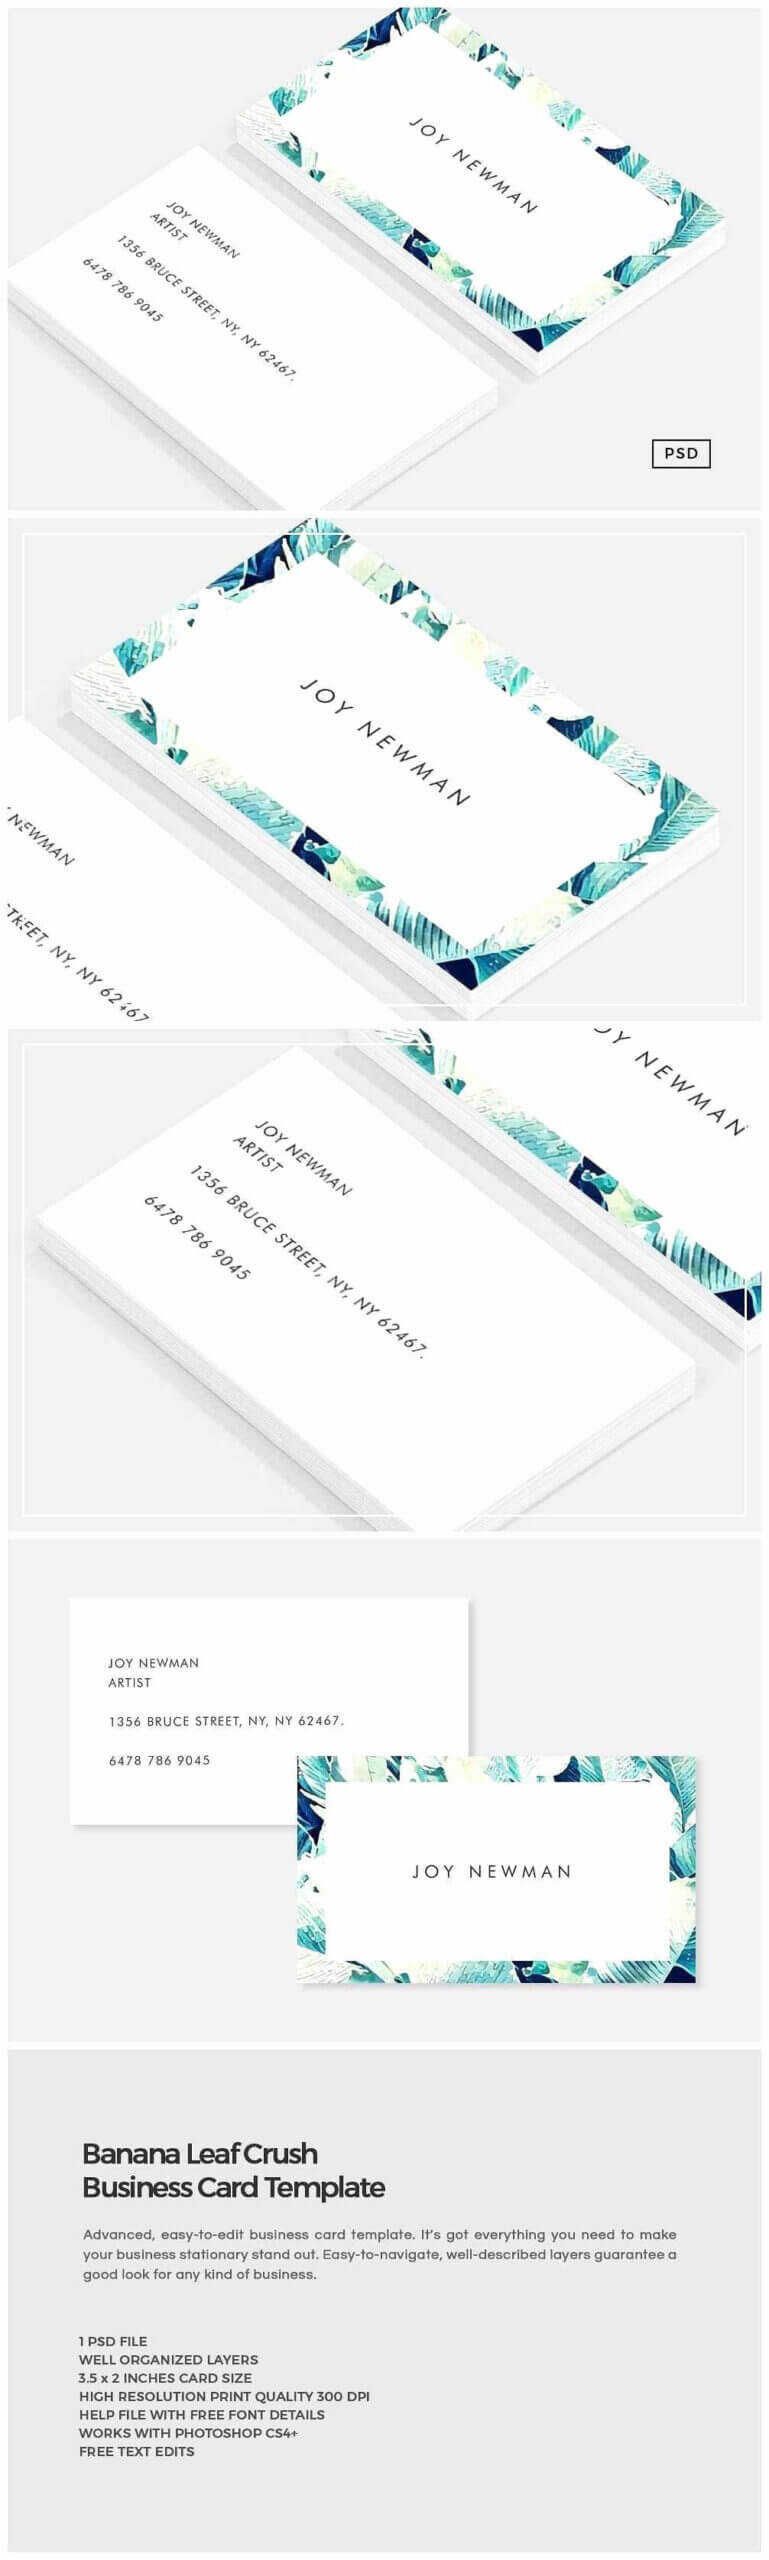 Business Card Size Photoshop Template – 10+ Professional Regarding Business Card Size Photoshop Template